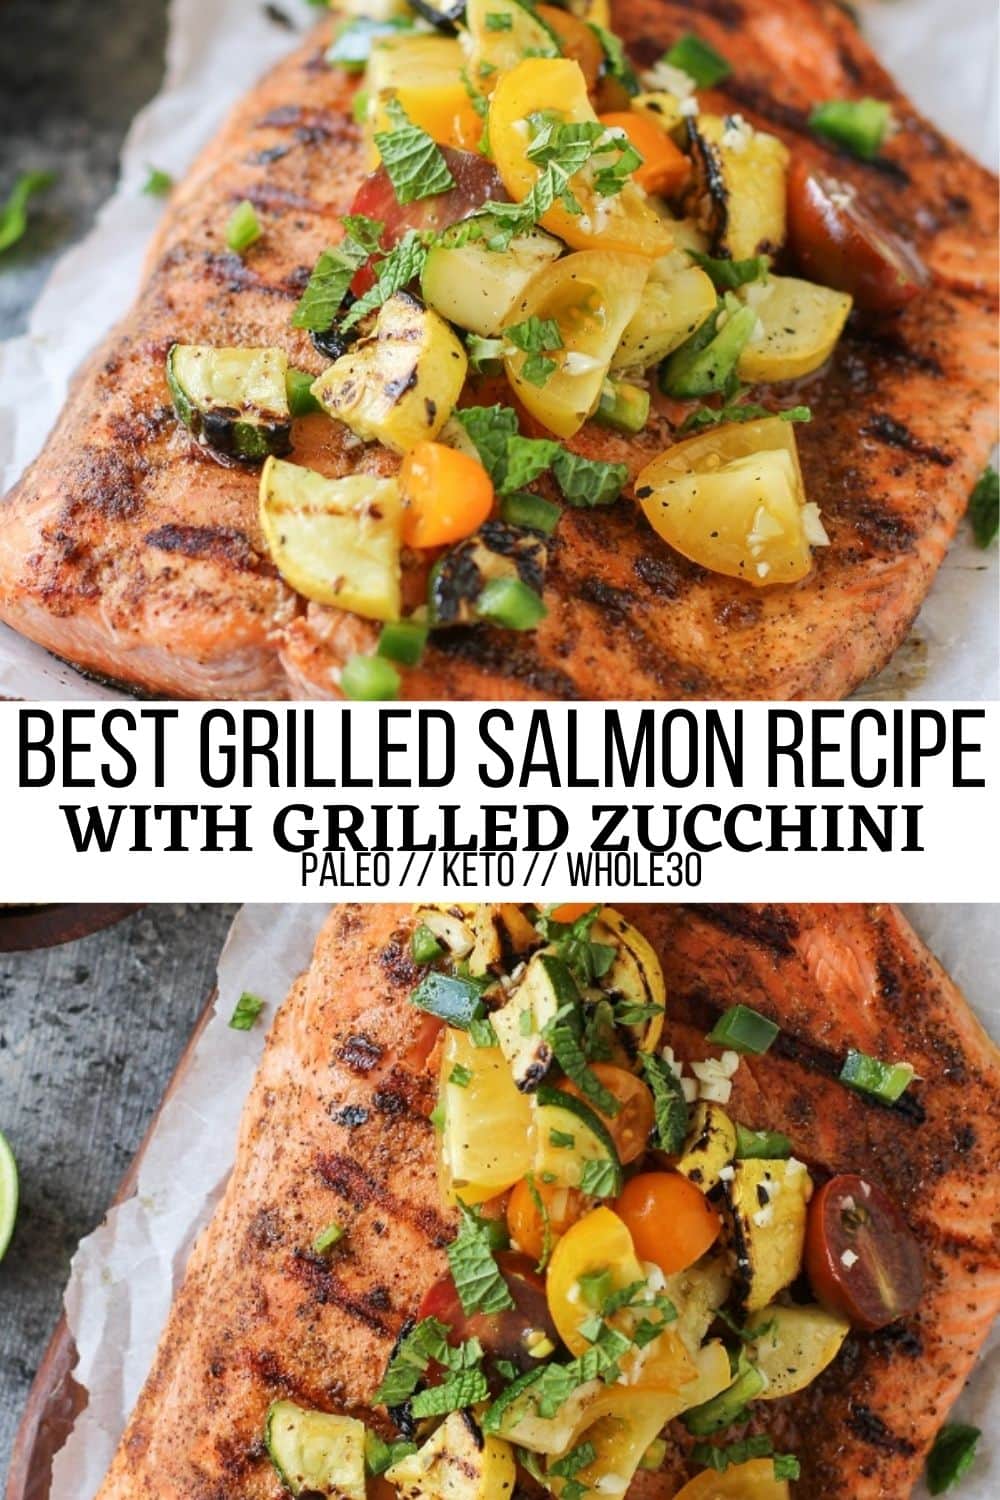 The Only Grilled Salmon Recipe You'll Ever Need! An easy tutorial on how to make THE BEST grilled salmon! Complete with a grilled zucchini and tomato salsa, this fresh, healthy dinner recipe is amazing for grilling season.